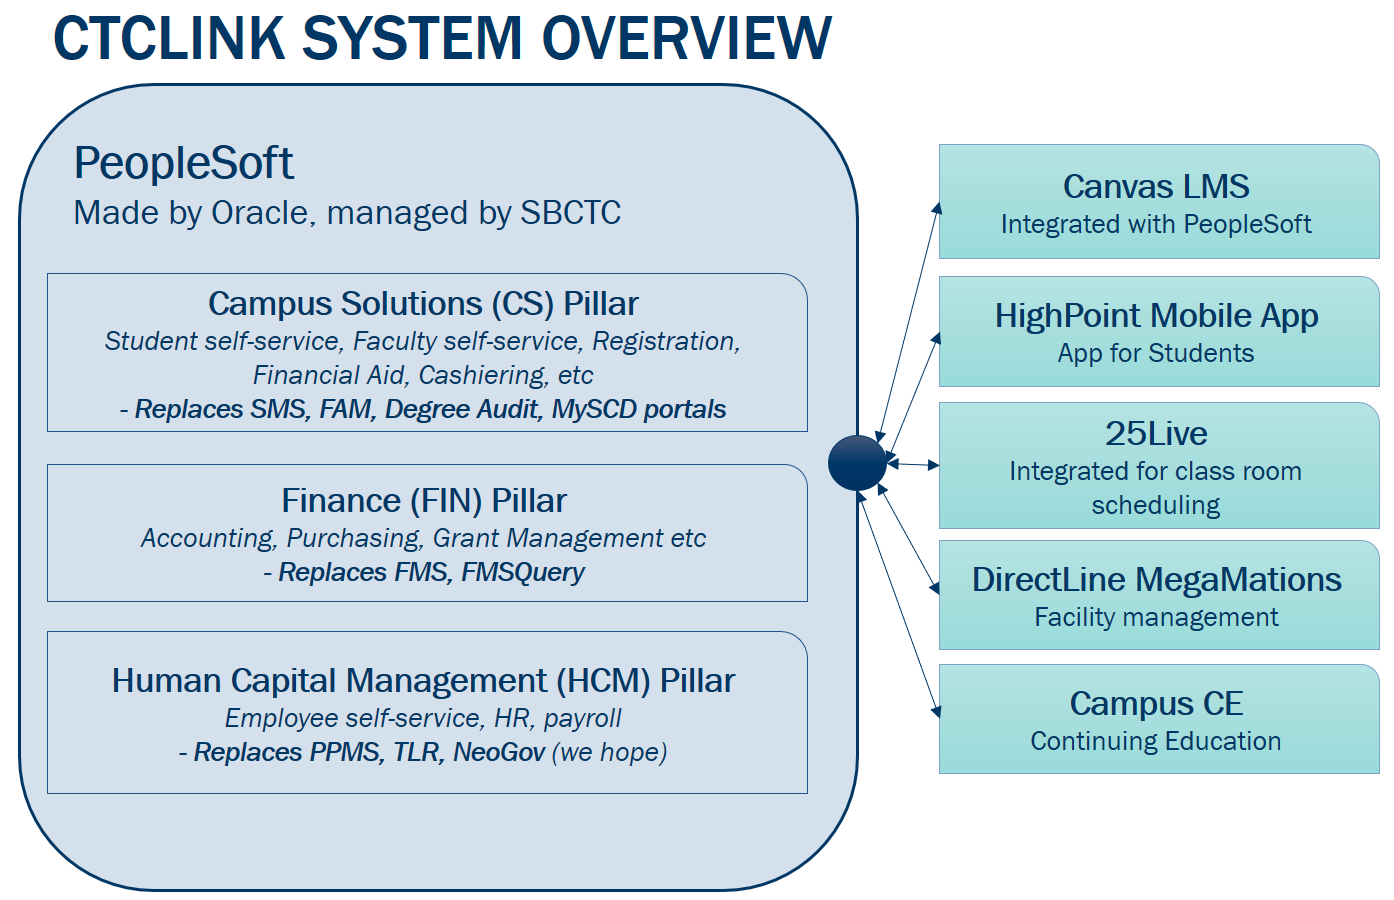 Diagram showing system connections between PeopleSoft Campus Solutions, Finance, and Human Capital Management.